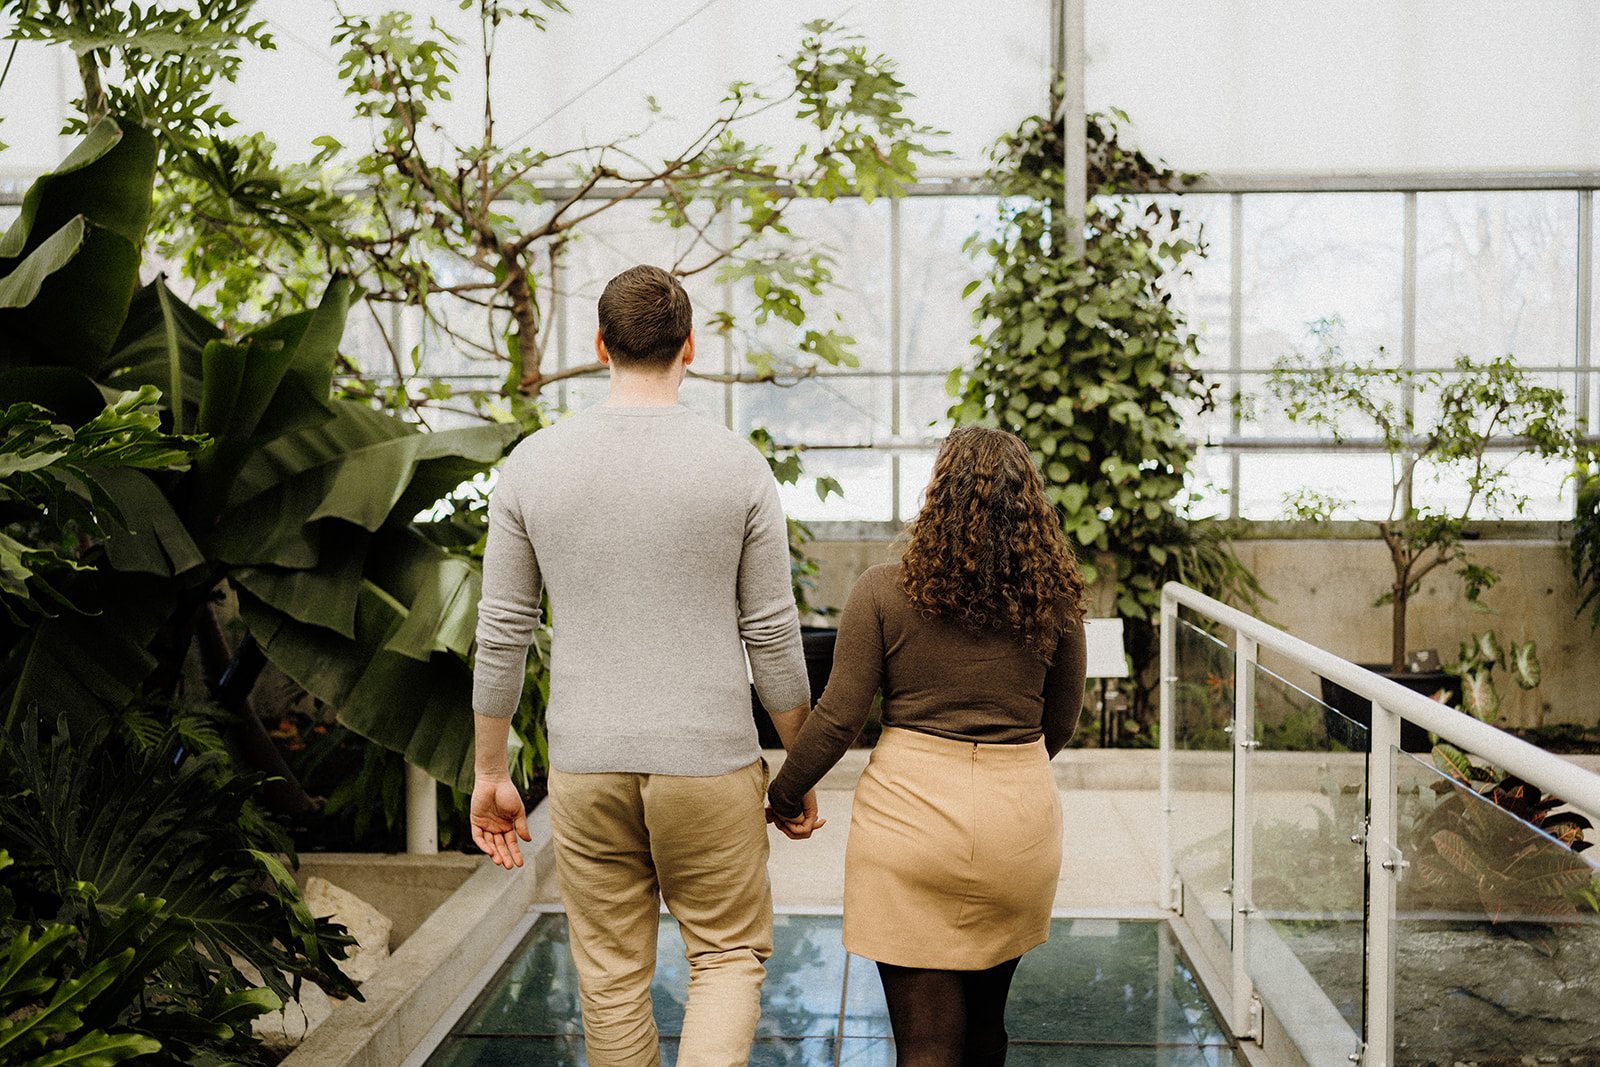 A man and woman walking down a pathway inside.